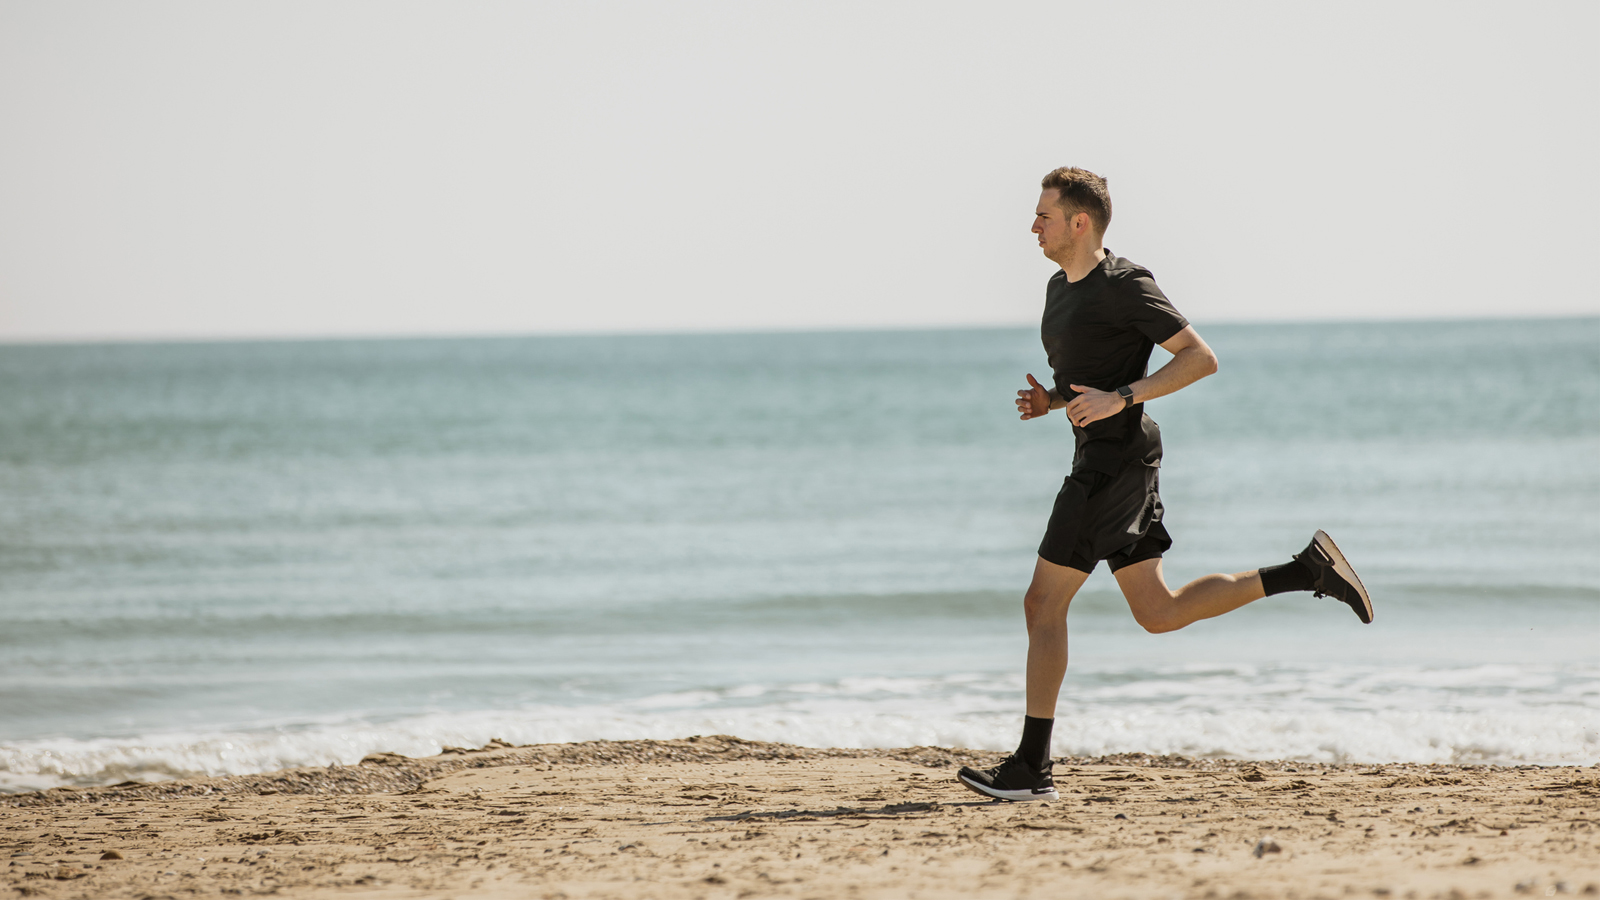 Running Prematurely Ages Men, According To New Study